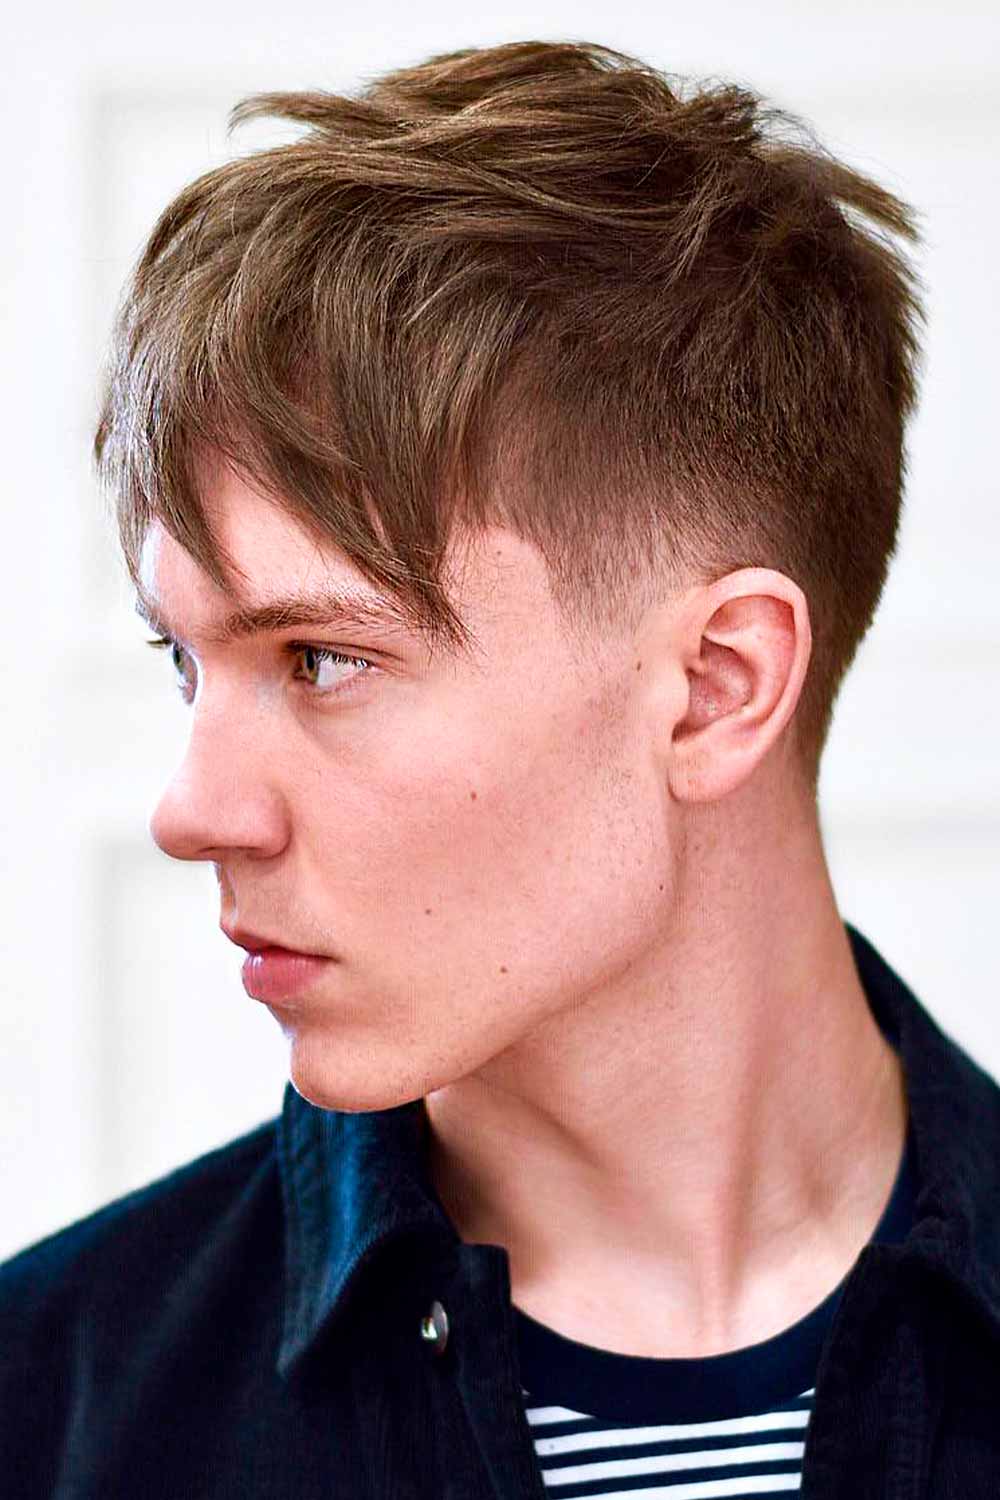 Teen Boy Haircuts: The Exquisite Collection With Celebrity Examples